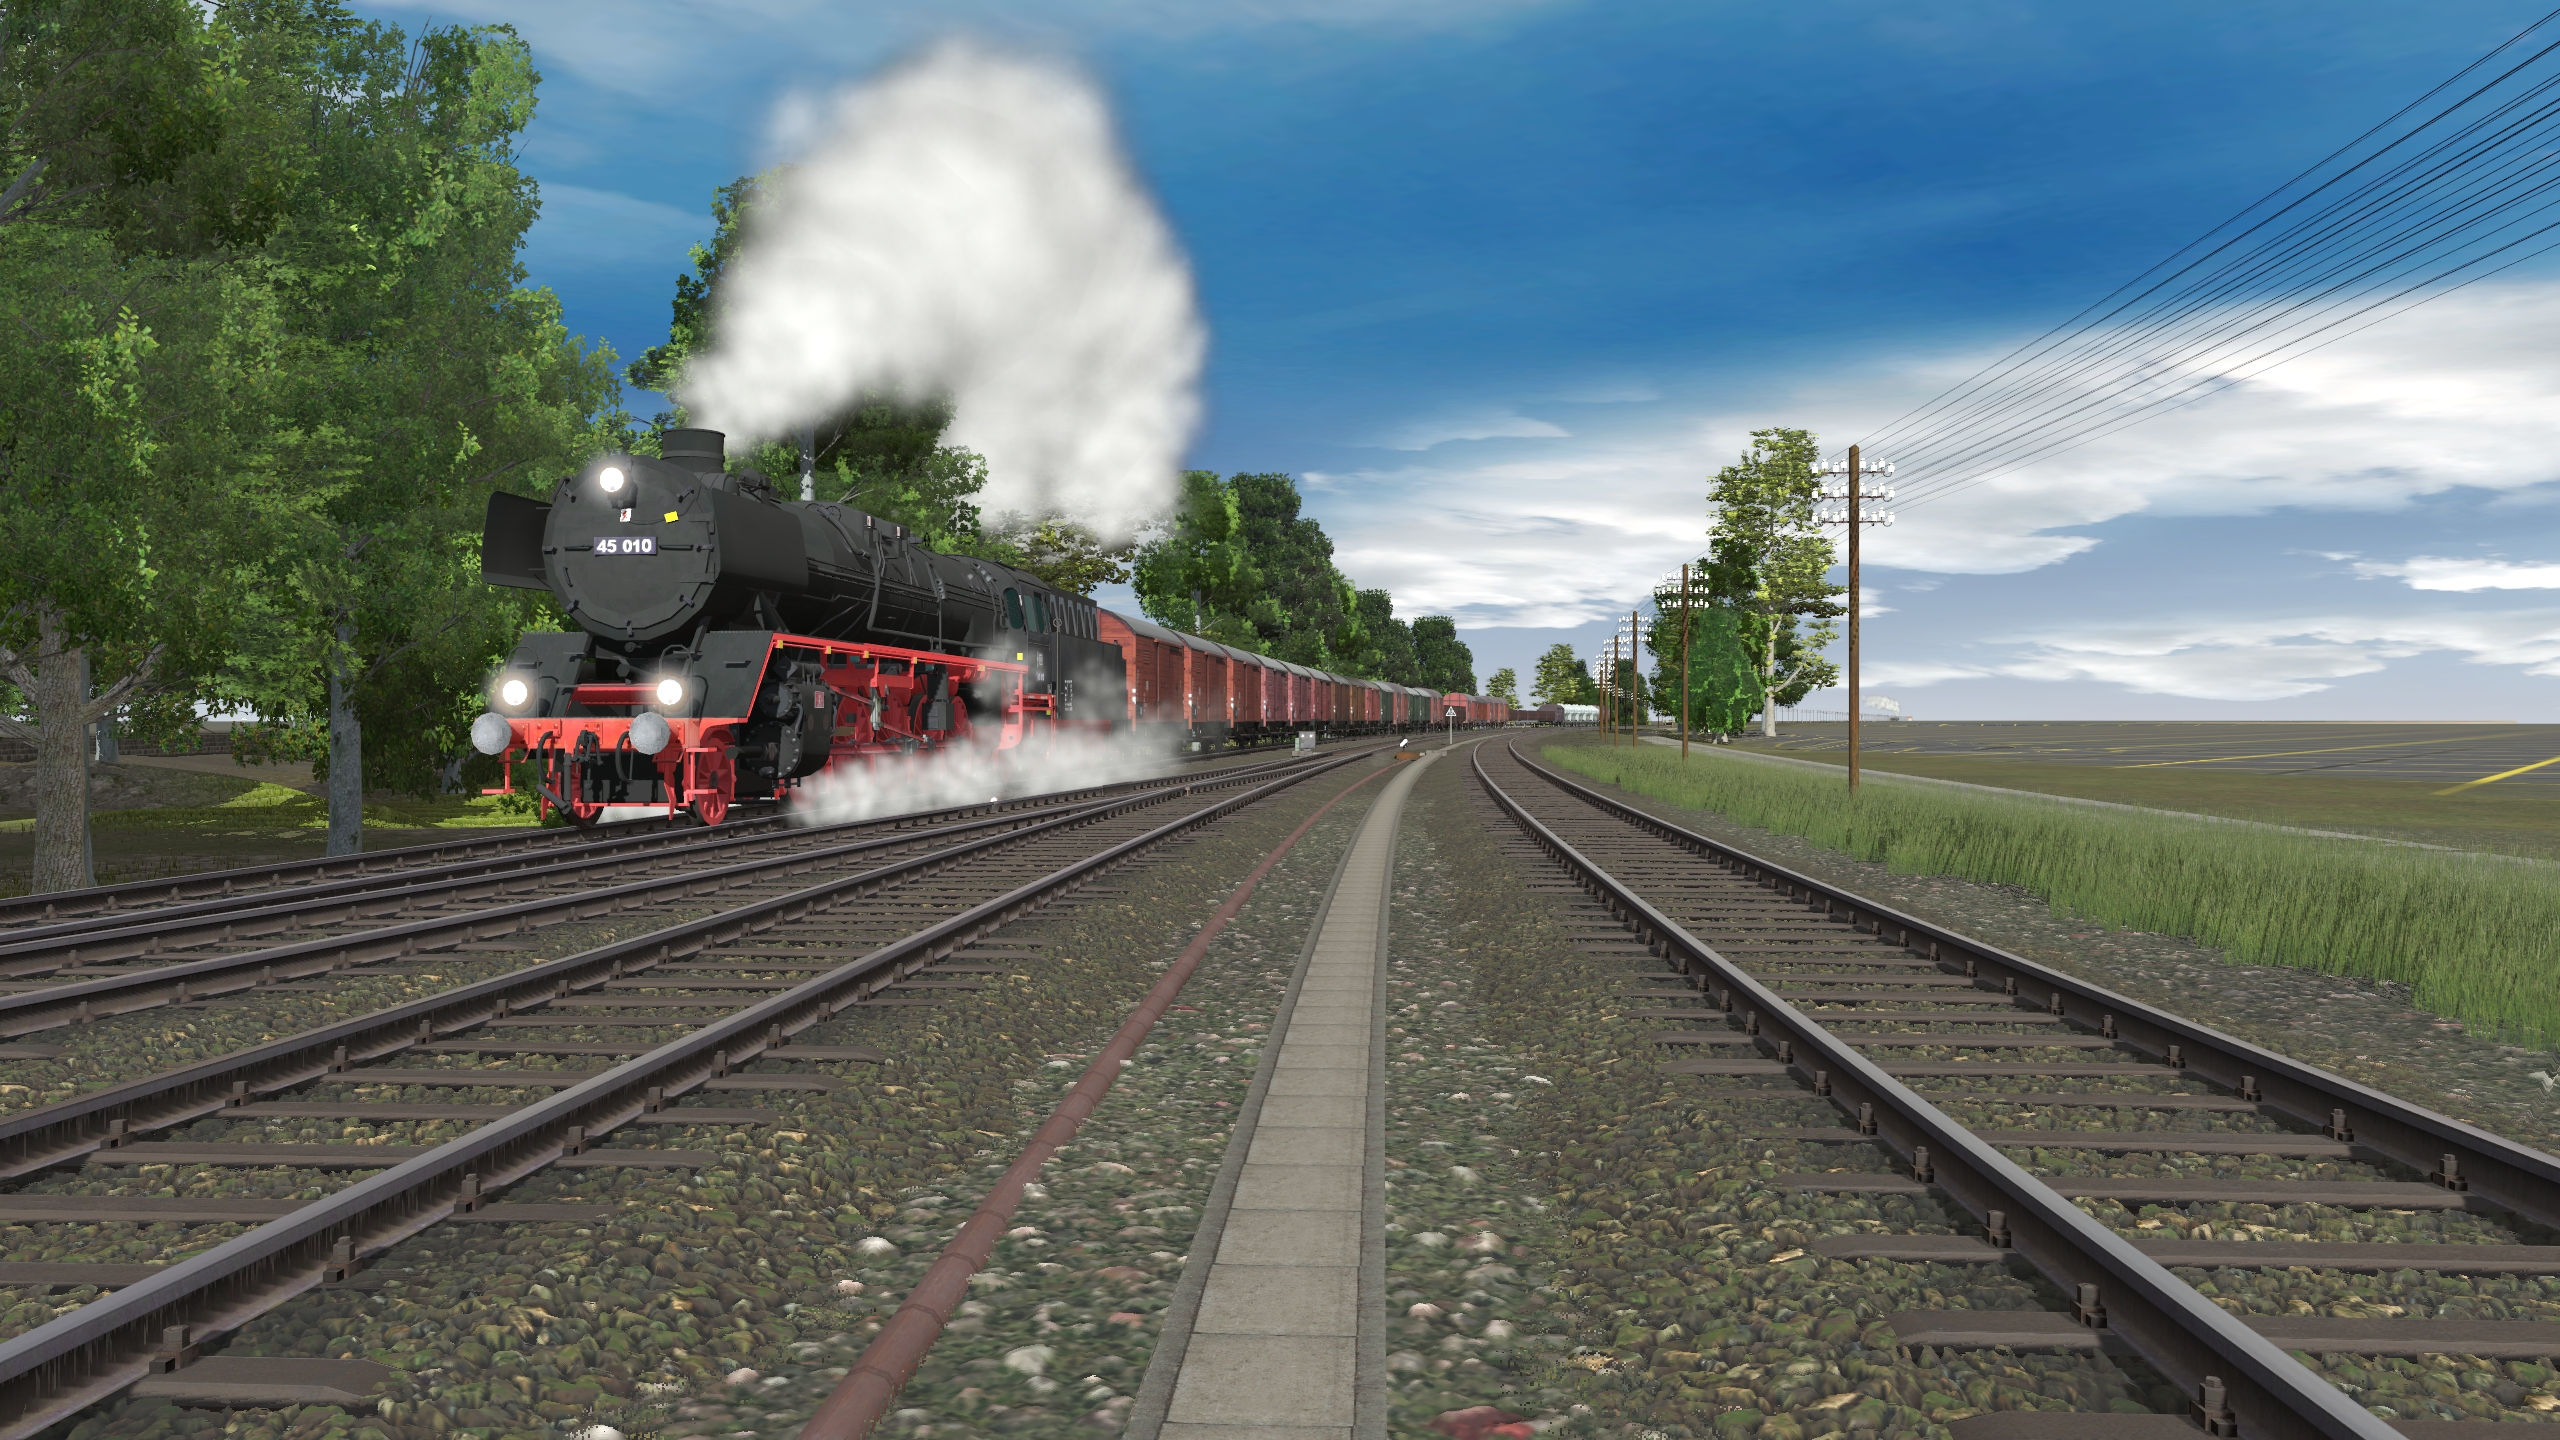 Br 45 hauling freight out of München passing junction no 4 inbound for track 6